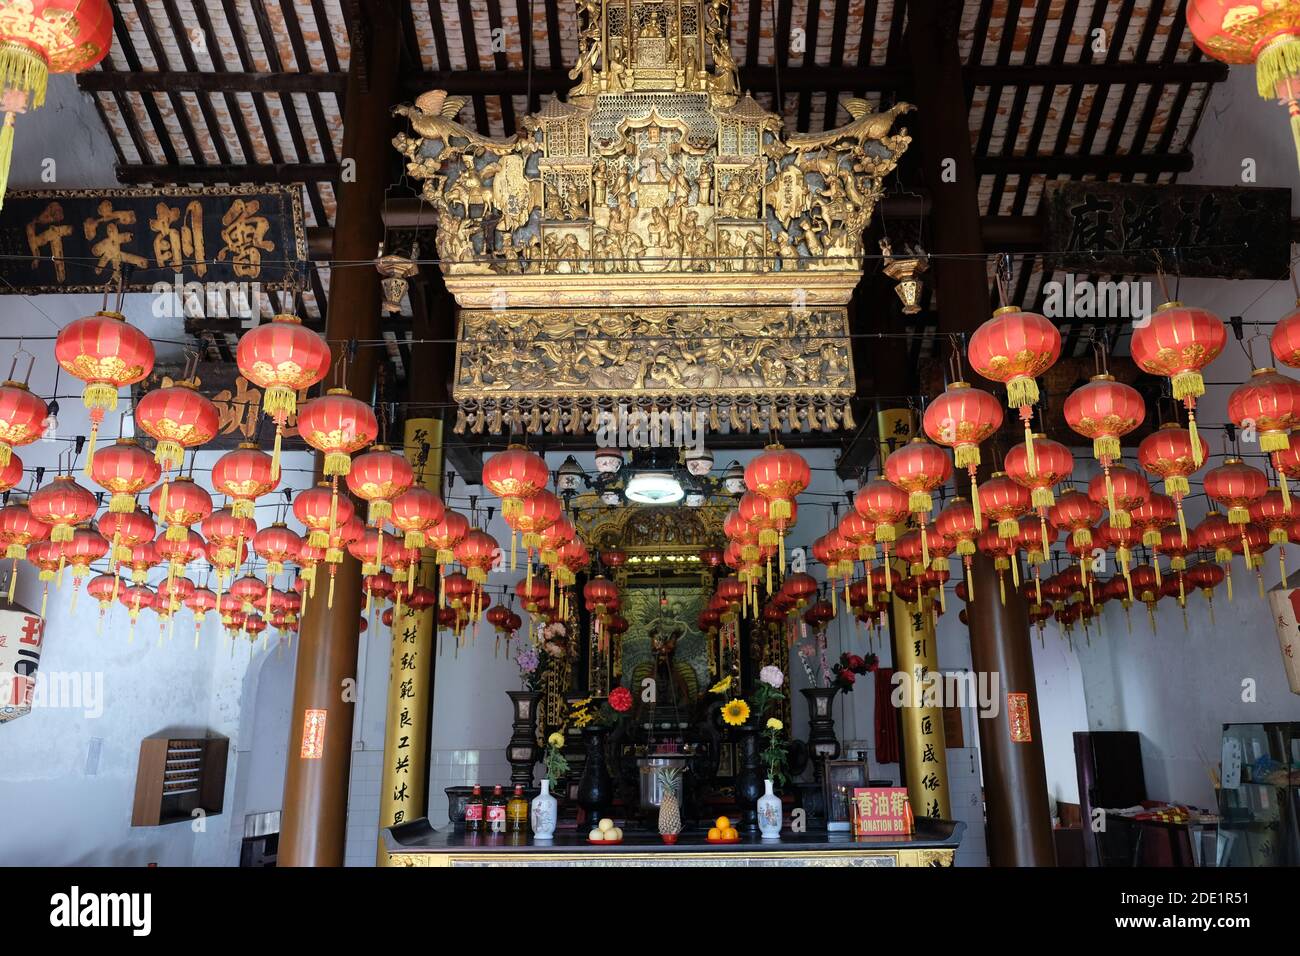 Penang George Town Malaysia - Kuan Im See Temple with decorative Chinese paper lanterns Stock Photo